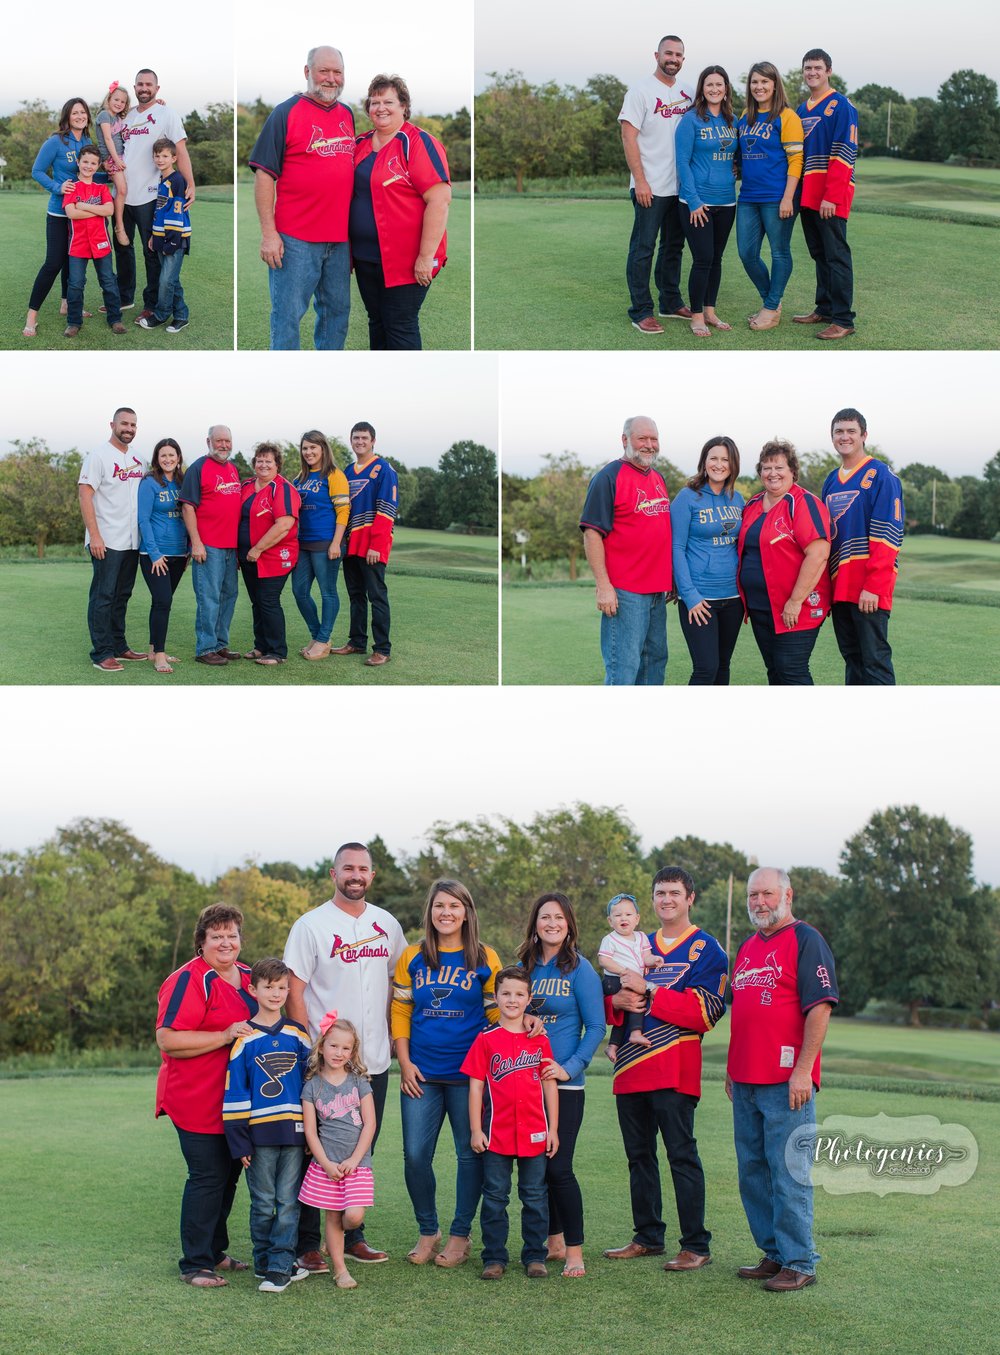  extended_family_sports_gear_st_louis_blues_st_louis_cardinals_baseball_jerserys_what_to_wear_coordinate_photography_photo_session 